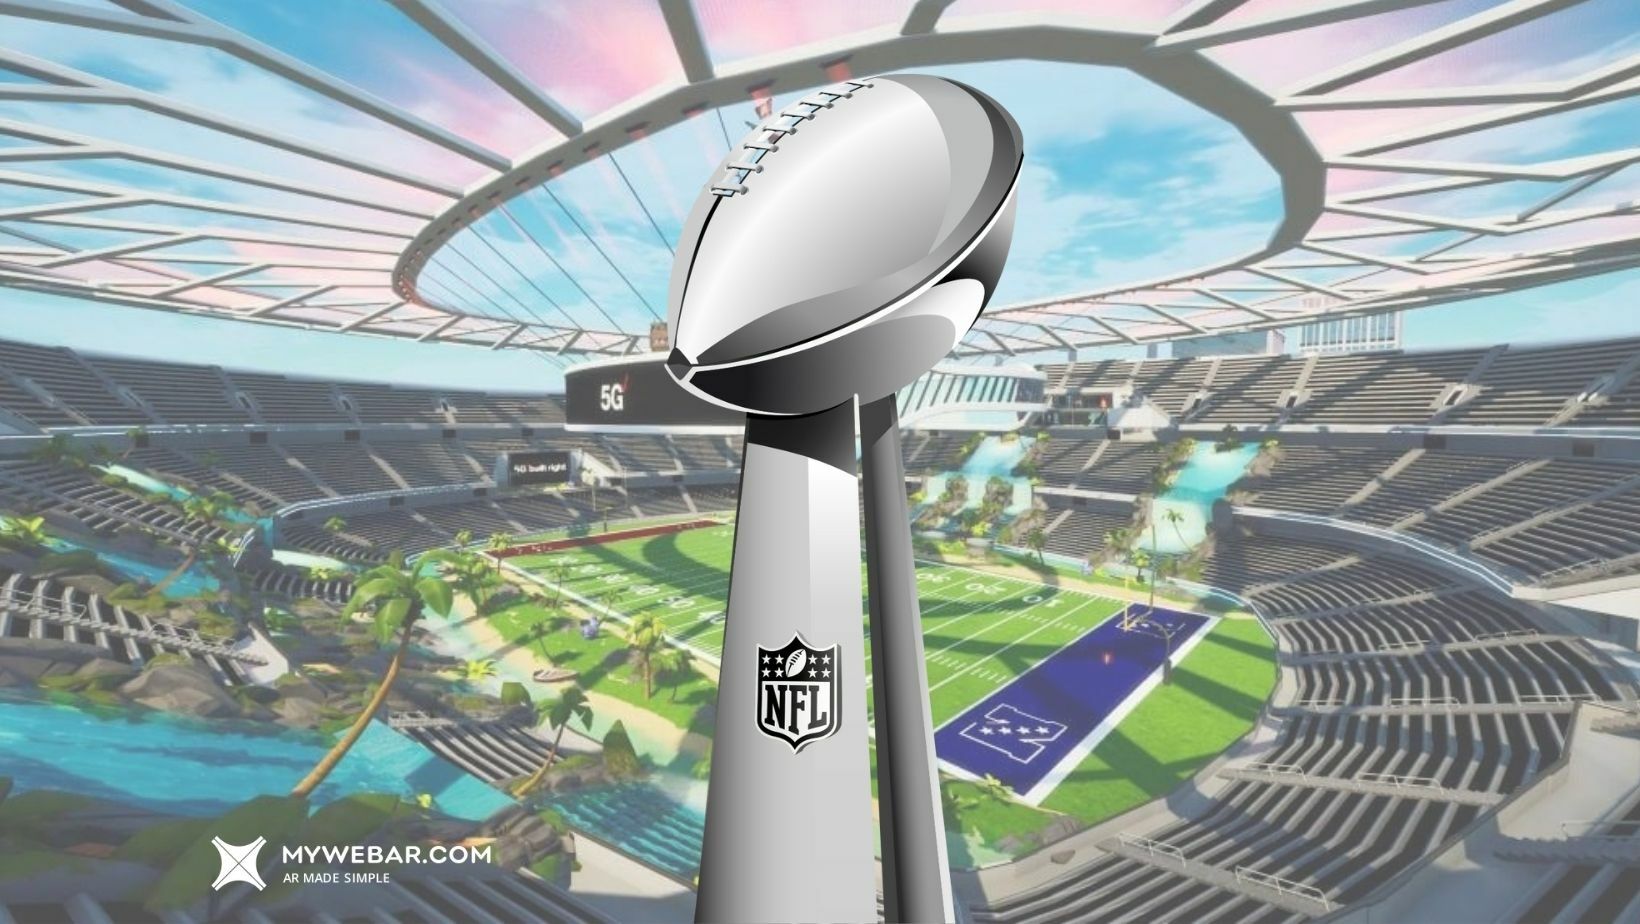 Super Bowl 2022 tickets will come with NFTs from the NFL